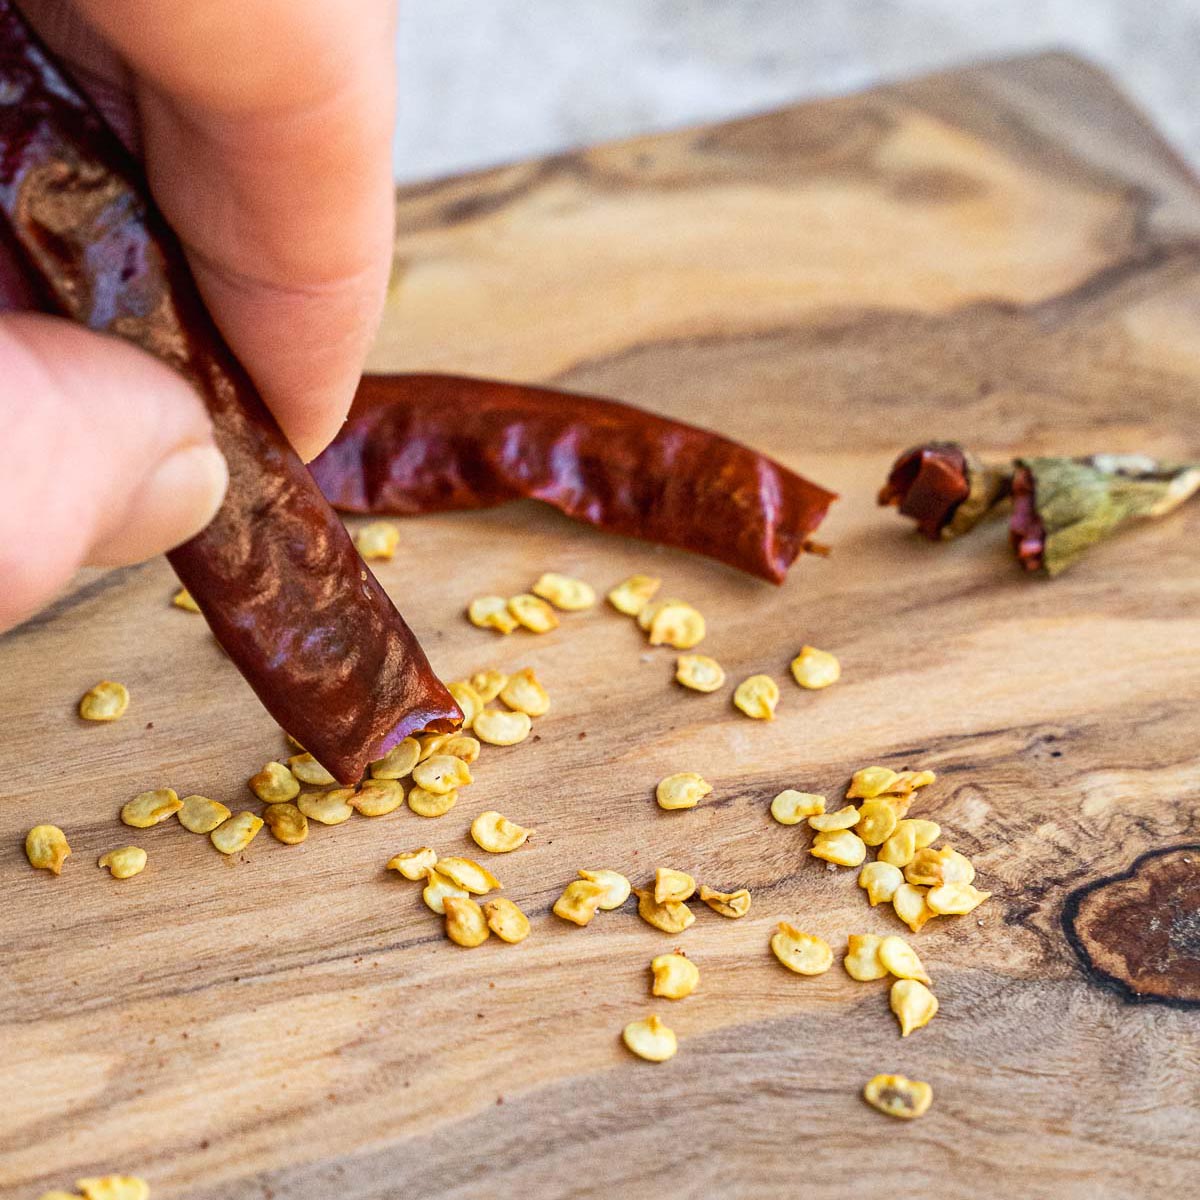 Two fingers holding a chile de arbol to remove the seeds.